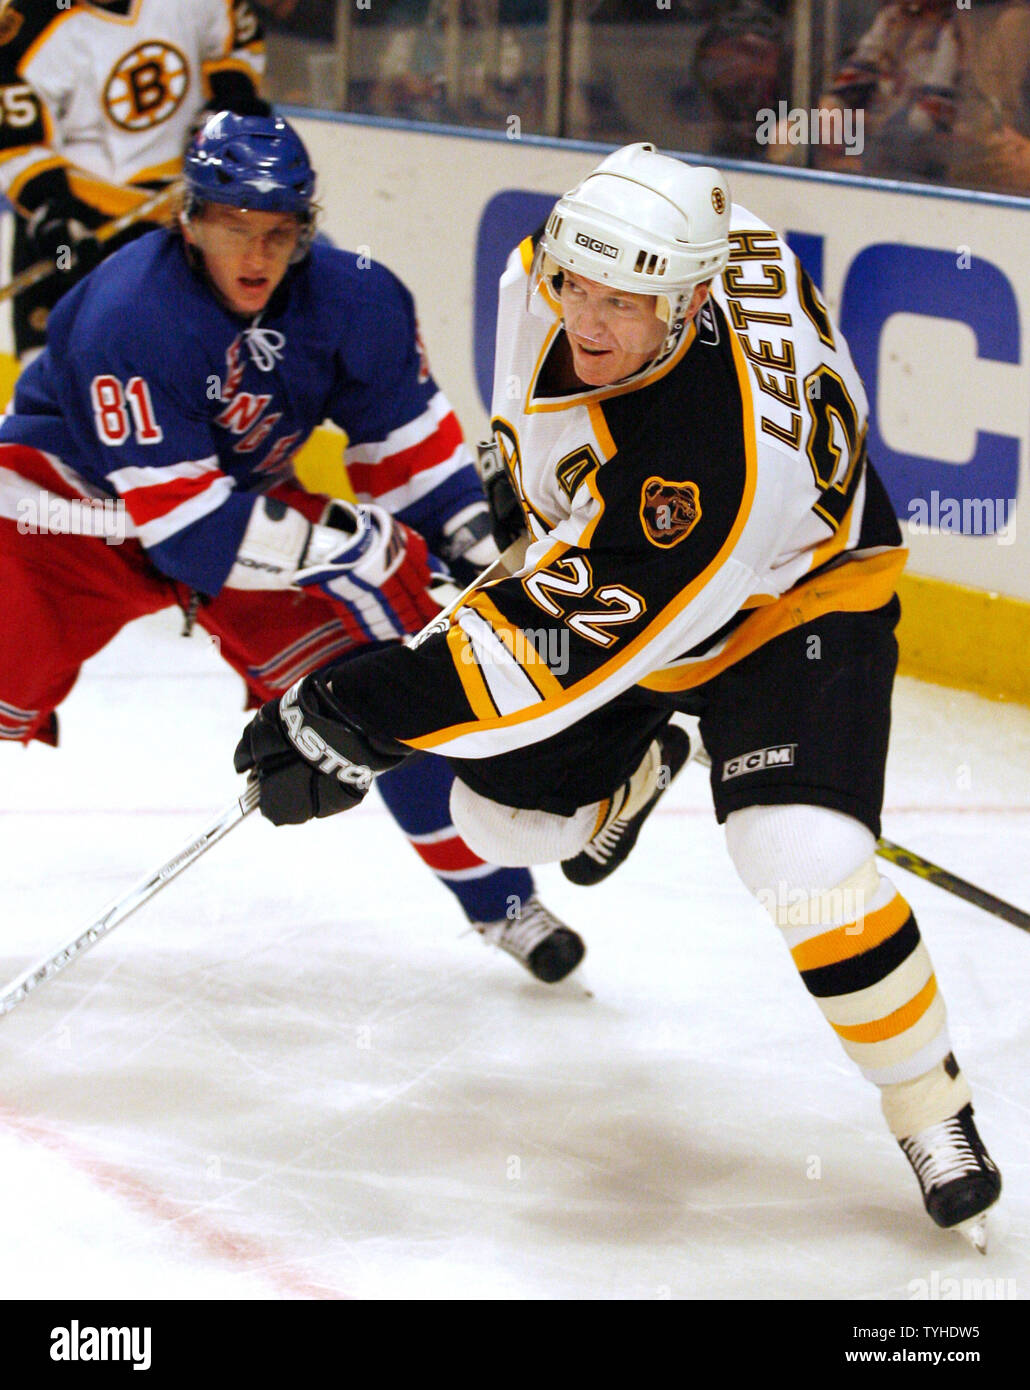 boston-bruins-22-brian-leetch-moves-the-puck-away-from-behind-the-goal-at-madison-square-garden-in-new-york-city-on-march-20-2006-the-new-york-rangers-defeated-the-boston-bruins-5-2-upi-photojohn-angelillo-TYHDW5.jpg